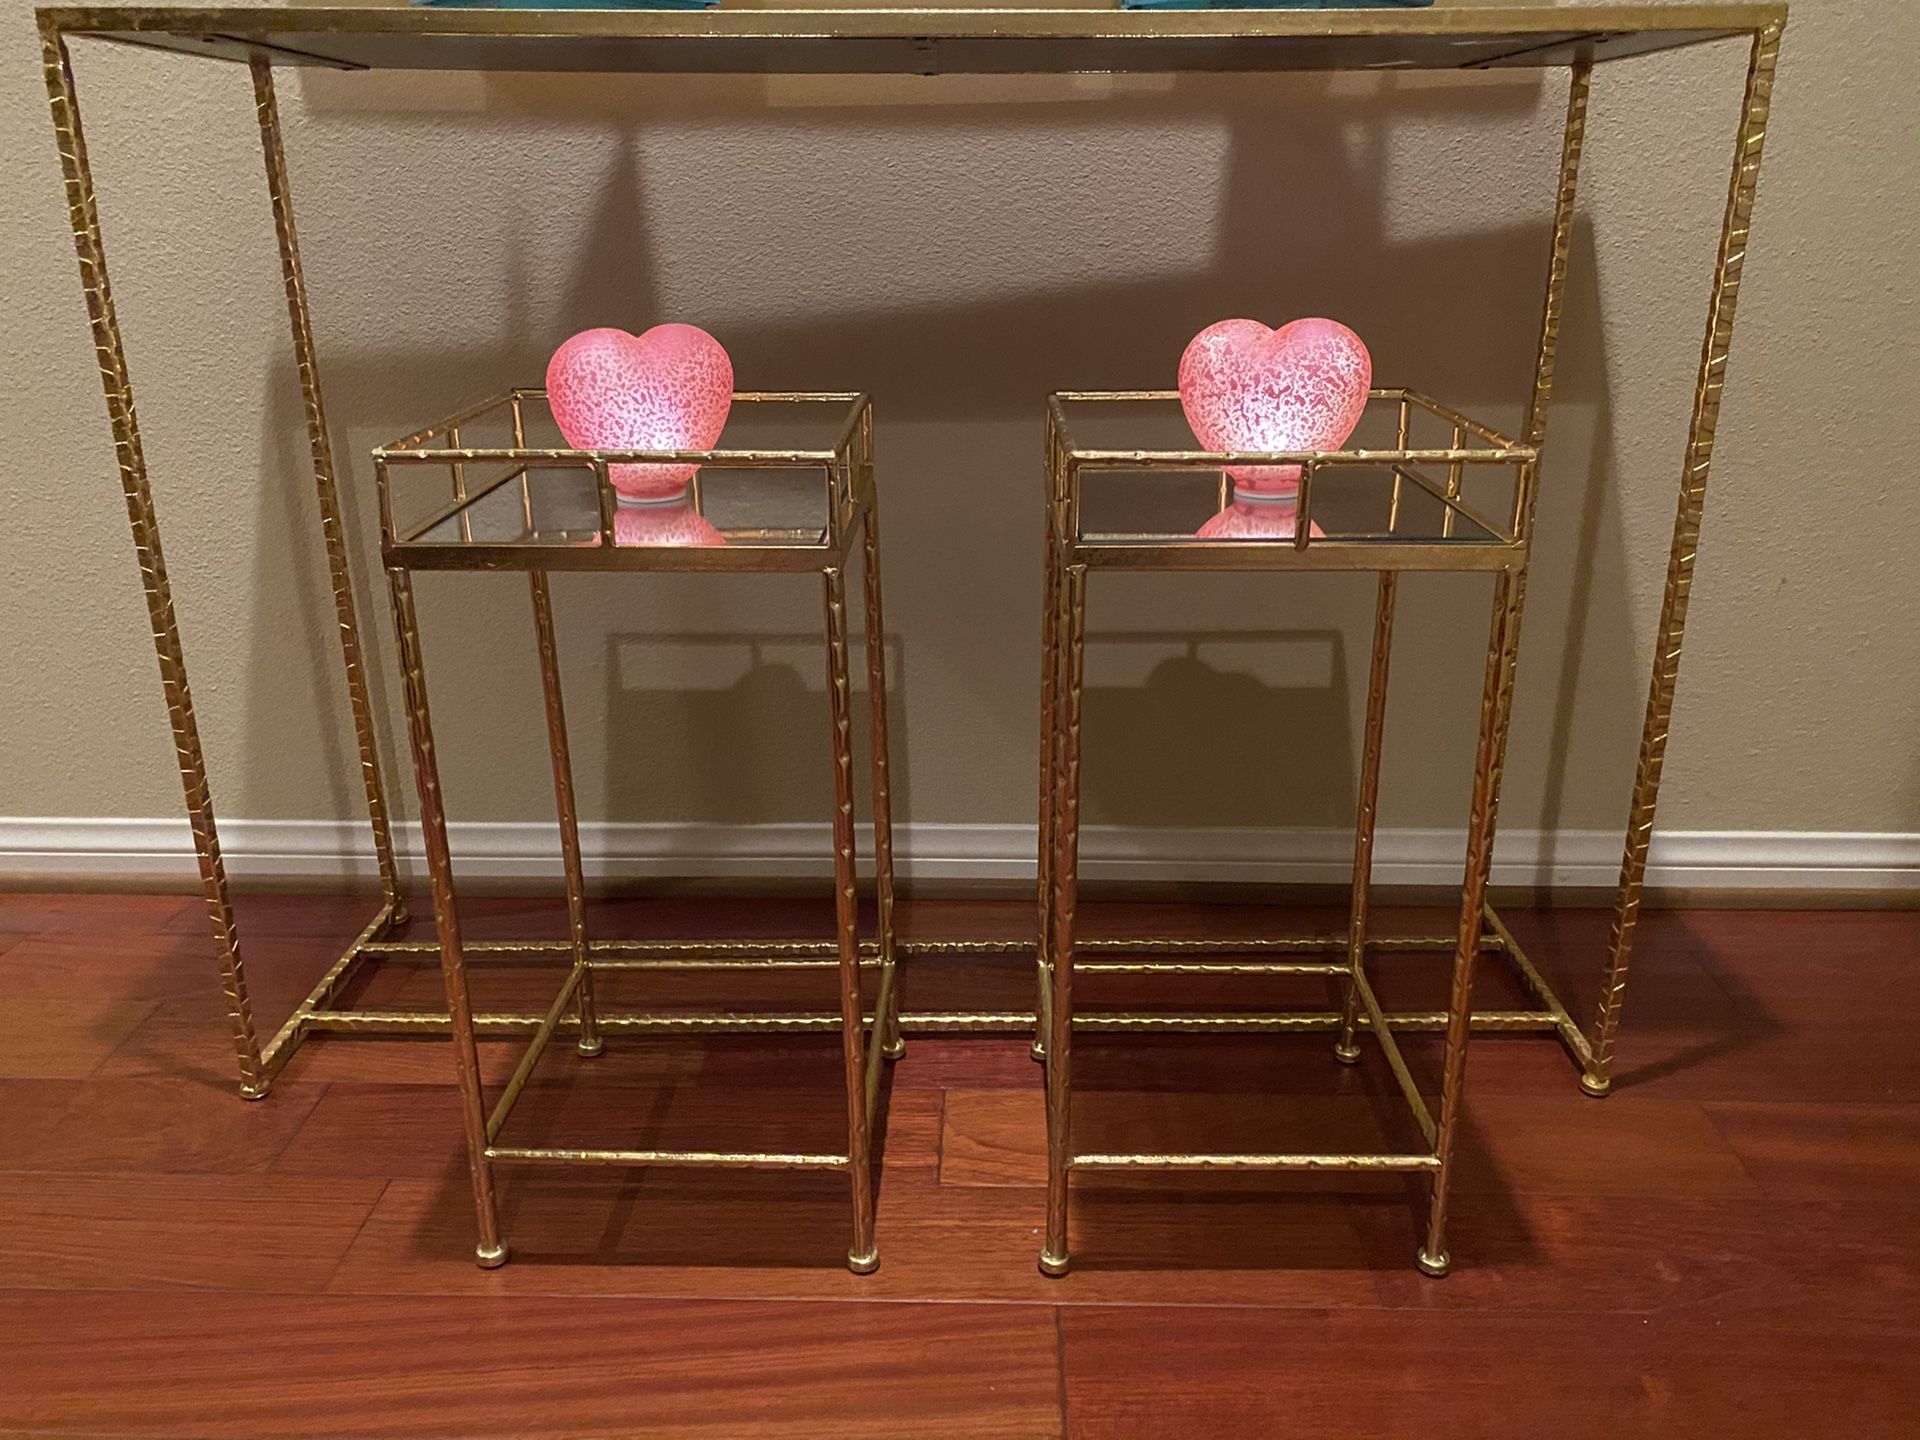 Home Decor- Tables- 2 Small Gold Tables with mirrored insert